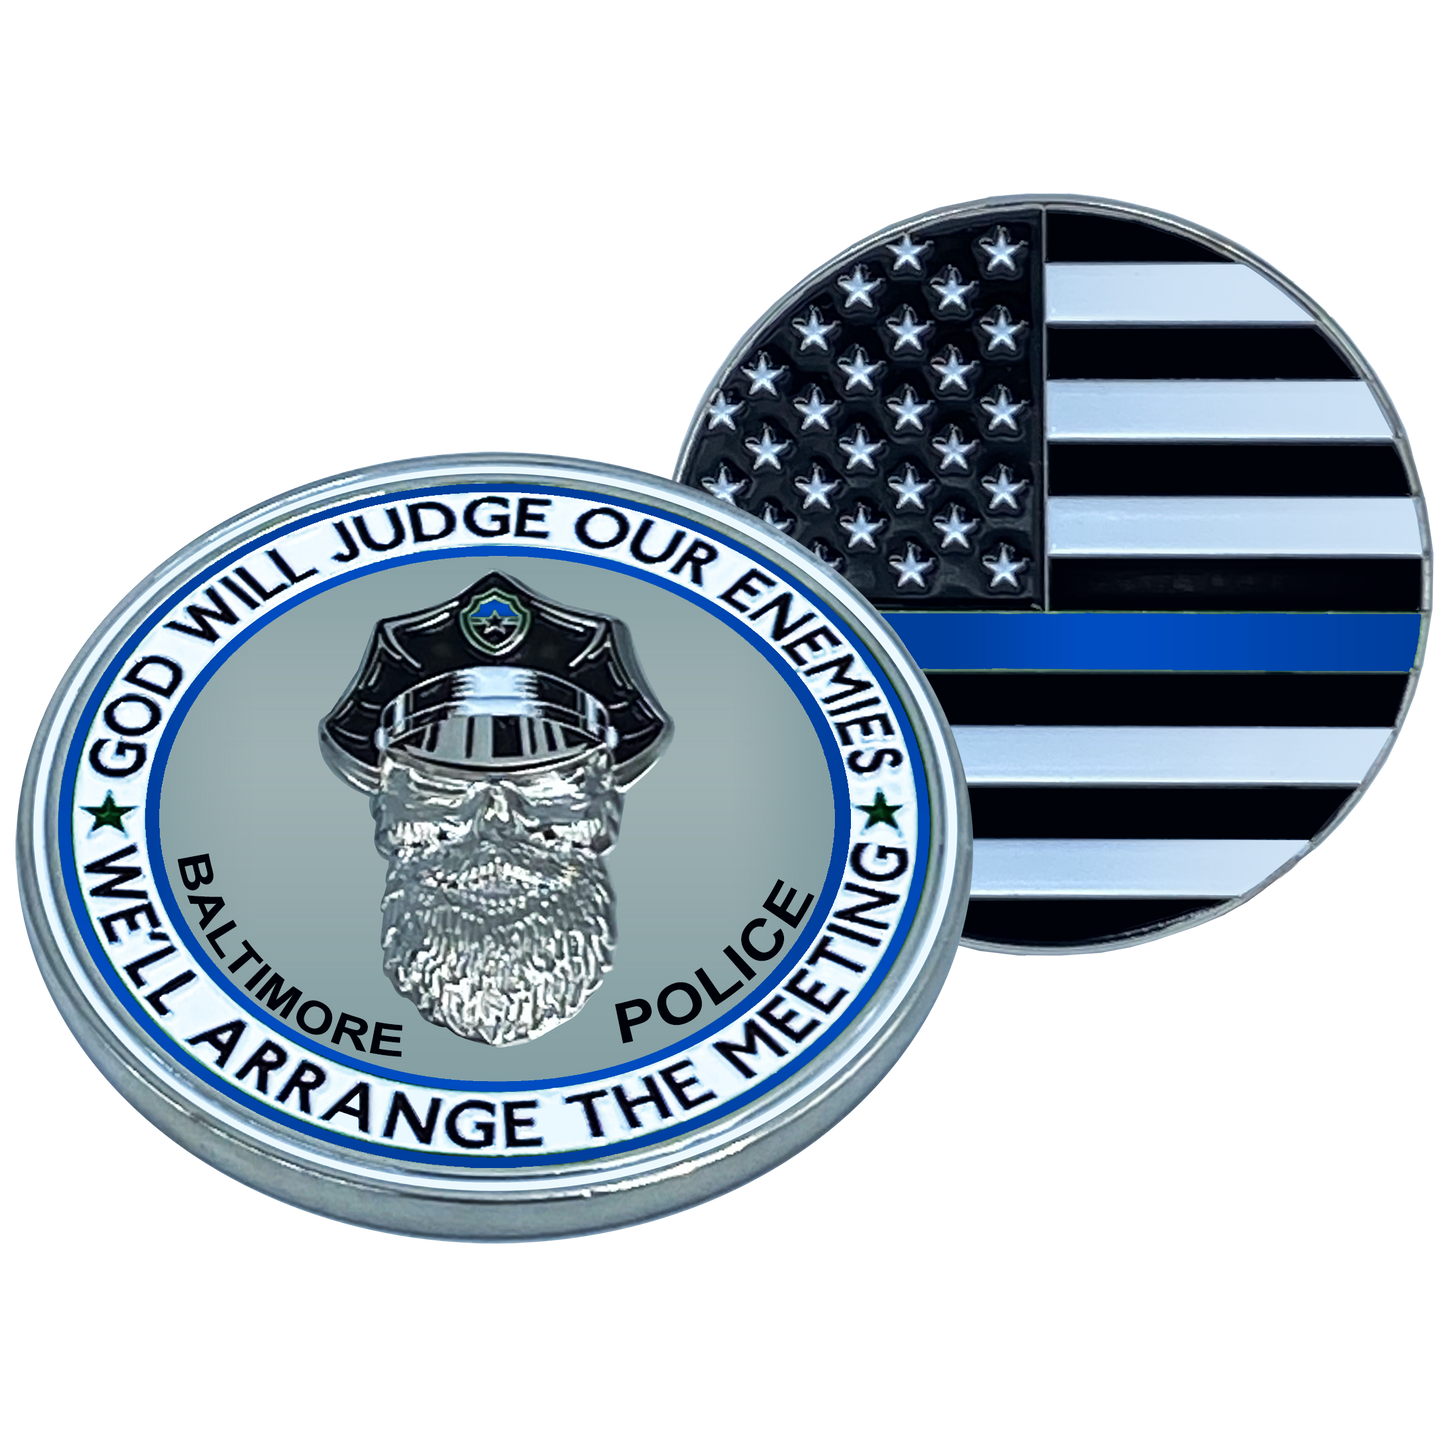 EL1-006 Thin Blue Line Baltimore Police God Will Judge BEARD GANG SKULL Challenge Coin City of Police Department BPD Maryland Back the Blue